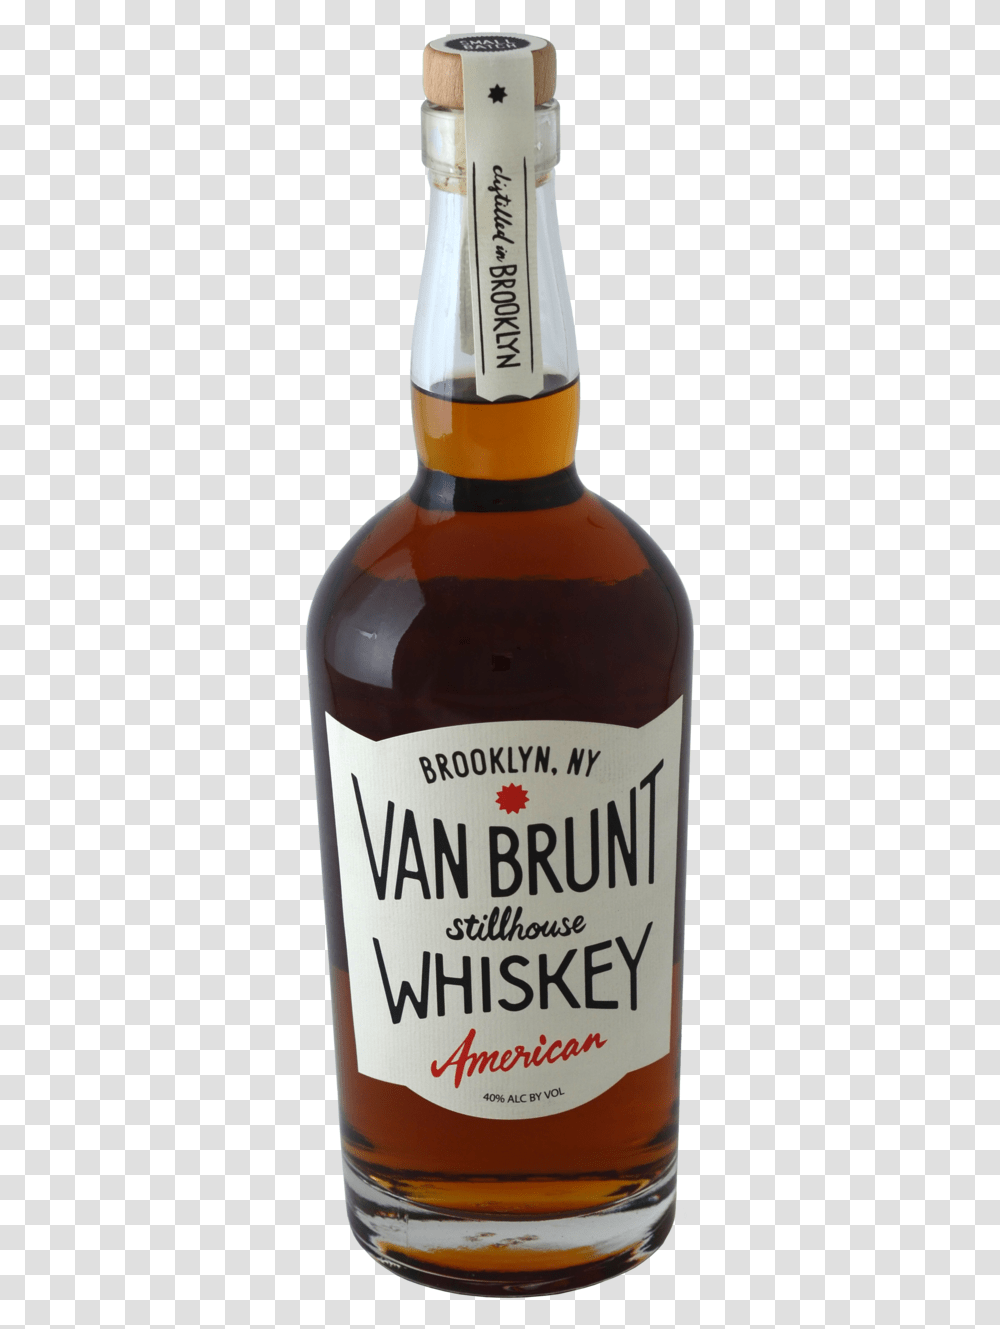 Wheat And Barley Are The Building Blocks For This Unique Stillhouse Corn Whiskey, Beer, Alcohol, Beverage, Drink Transparent Png